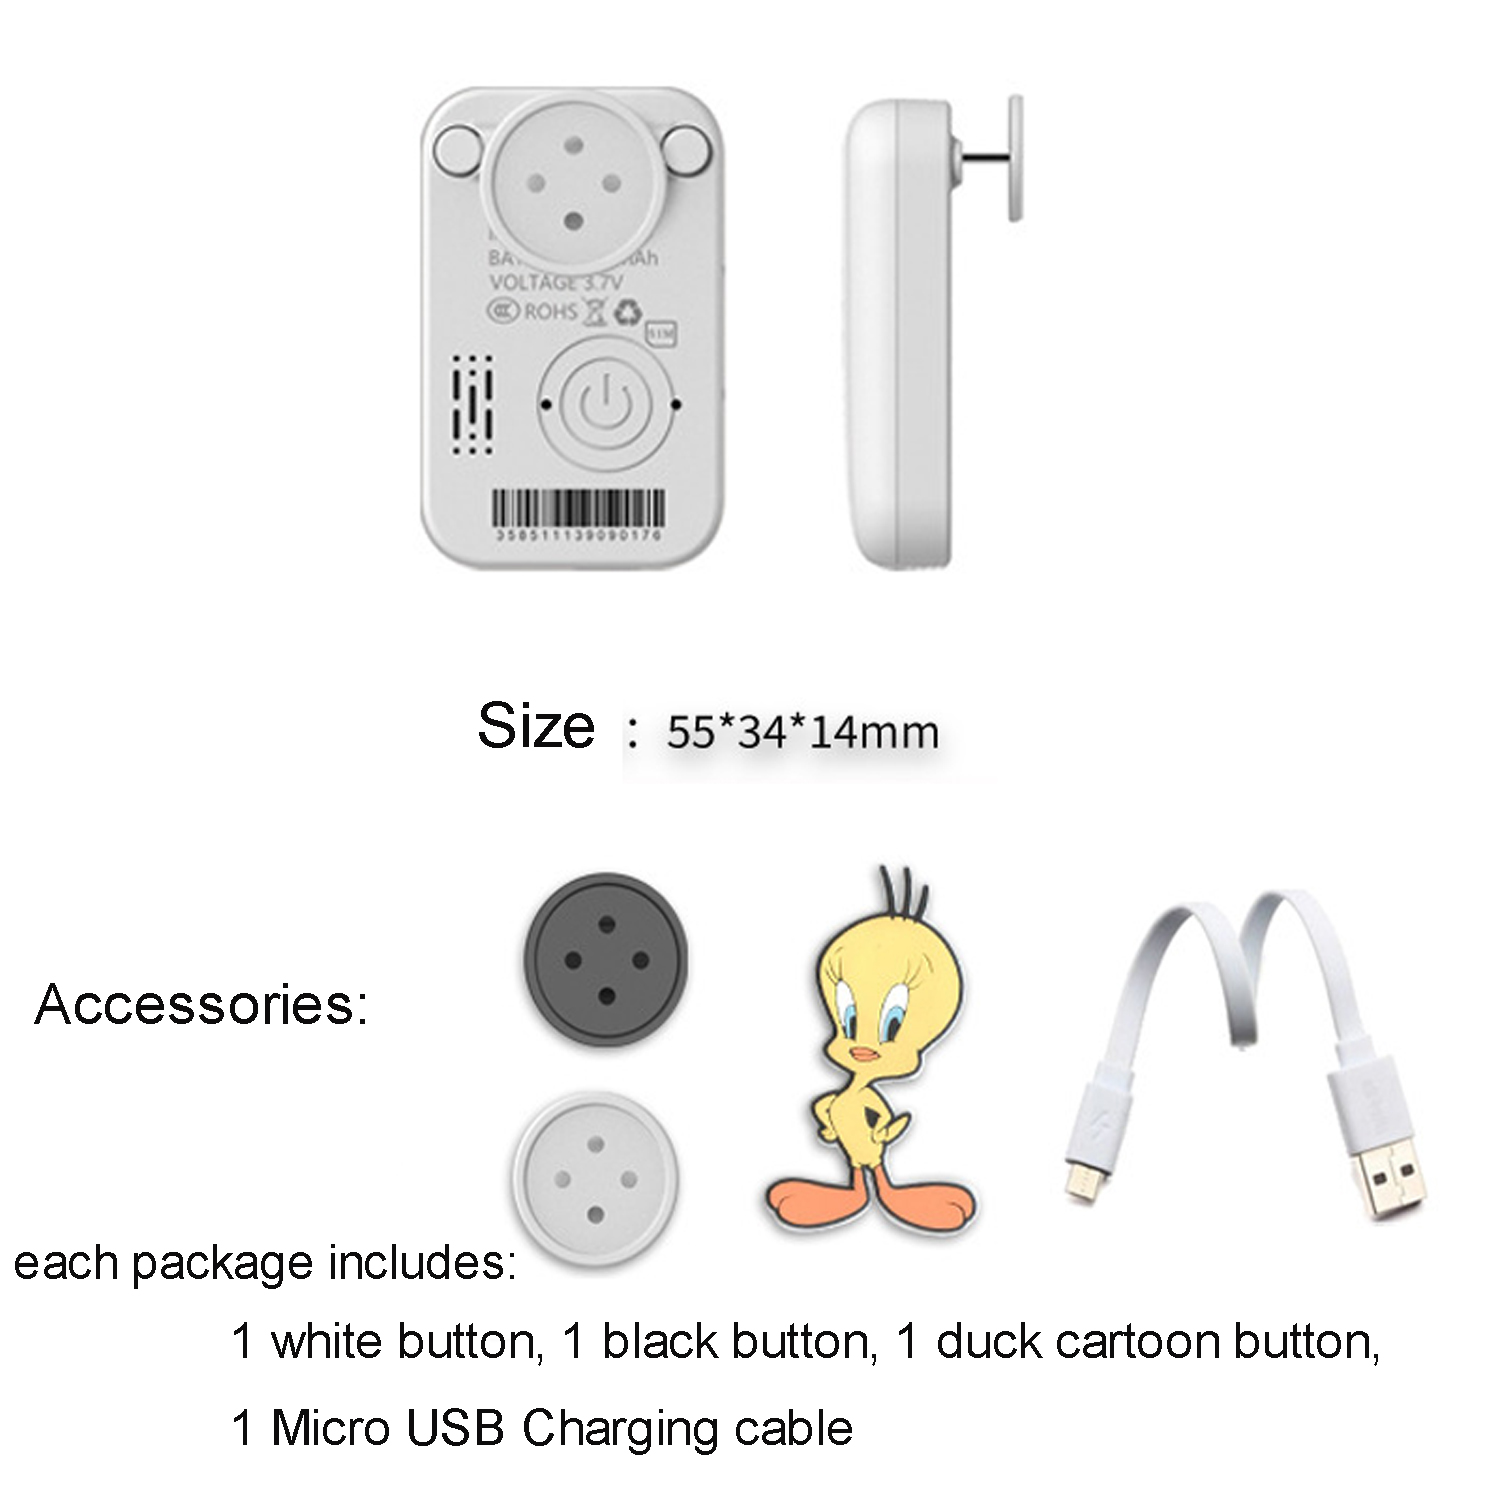 2G IP67 Waterproof Hidden GPS Tracker with Button Pin for Kids 